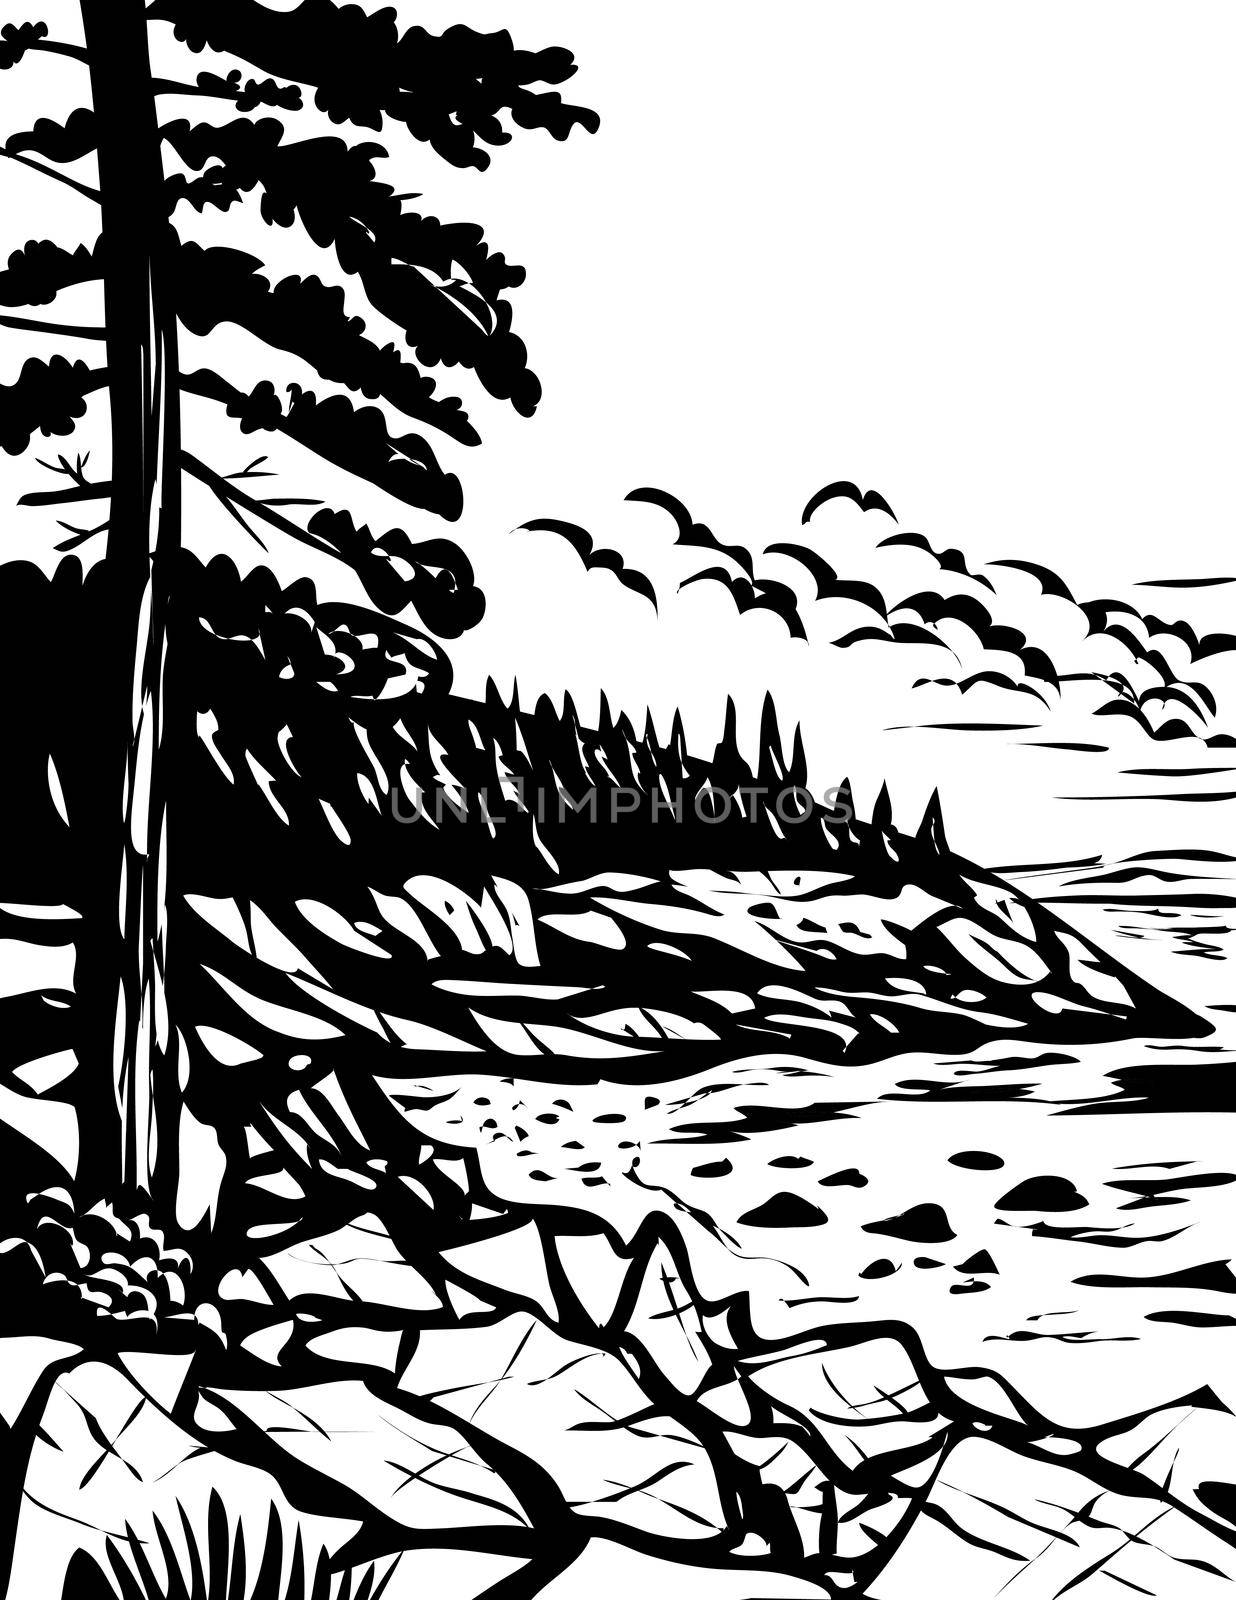 WPA poster monochrome art of the Acadia National Park on Mount Desert Island, Maine USA done in works project administration black and white style.